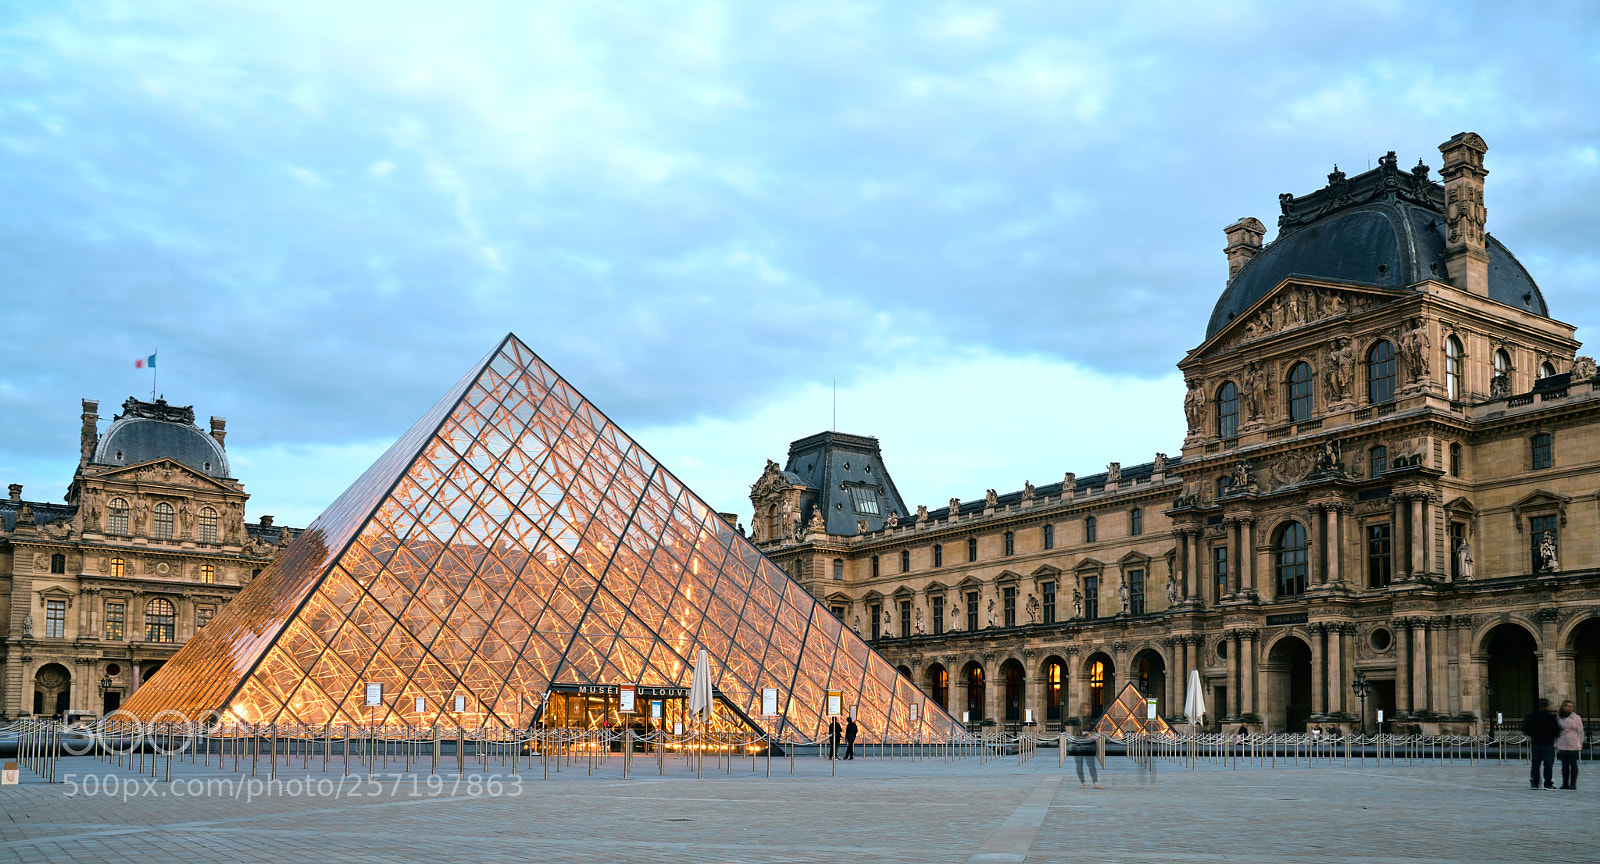 Sony a7R II sample photo. Louvre museum photography